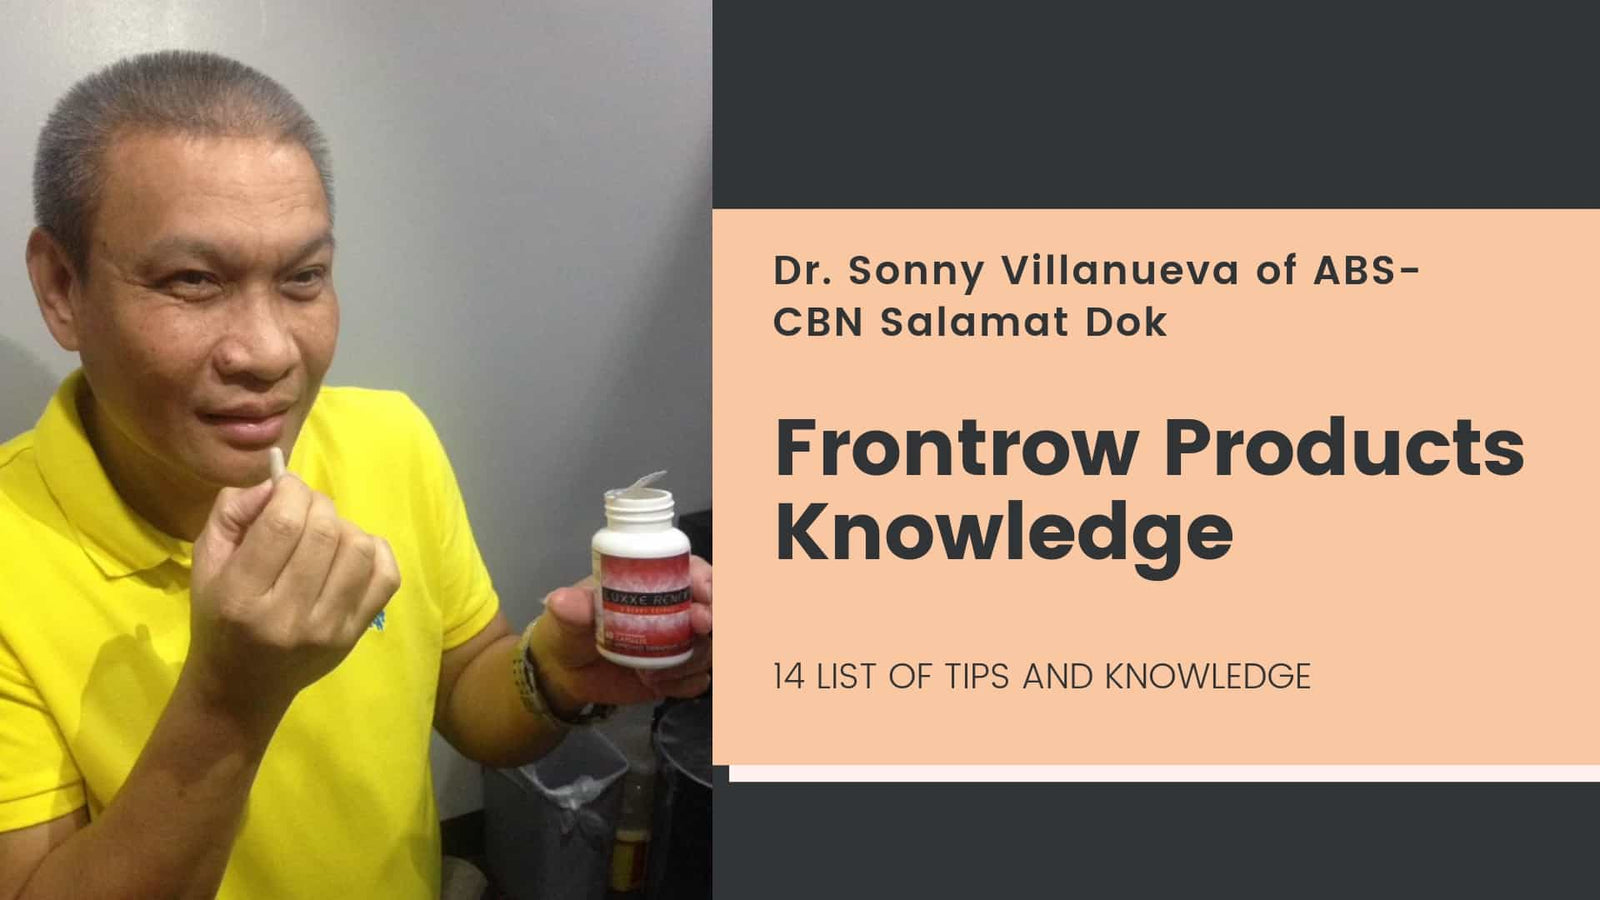 Frontrow Products 14 Tips from Dr. Sonny Villanueva of ABS-CBN Salamat Dok